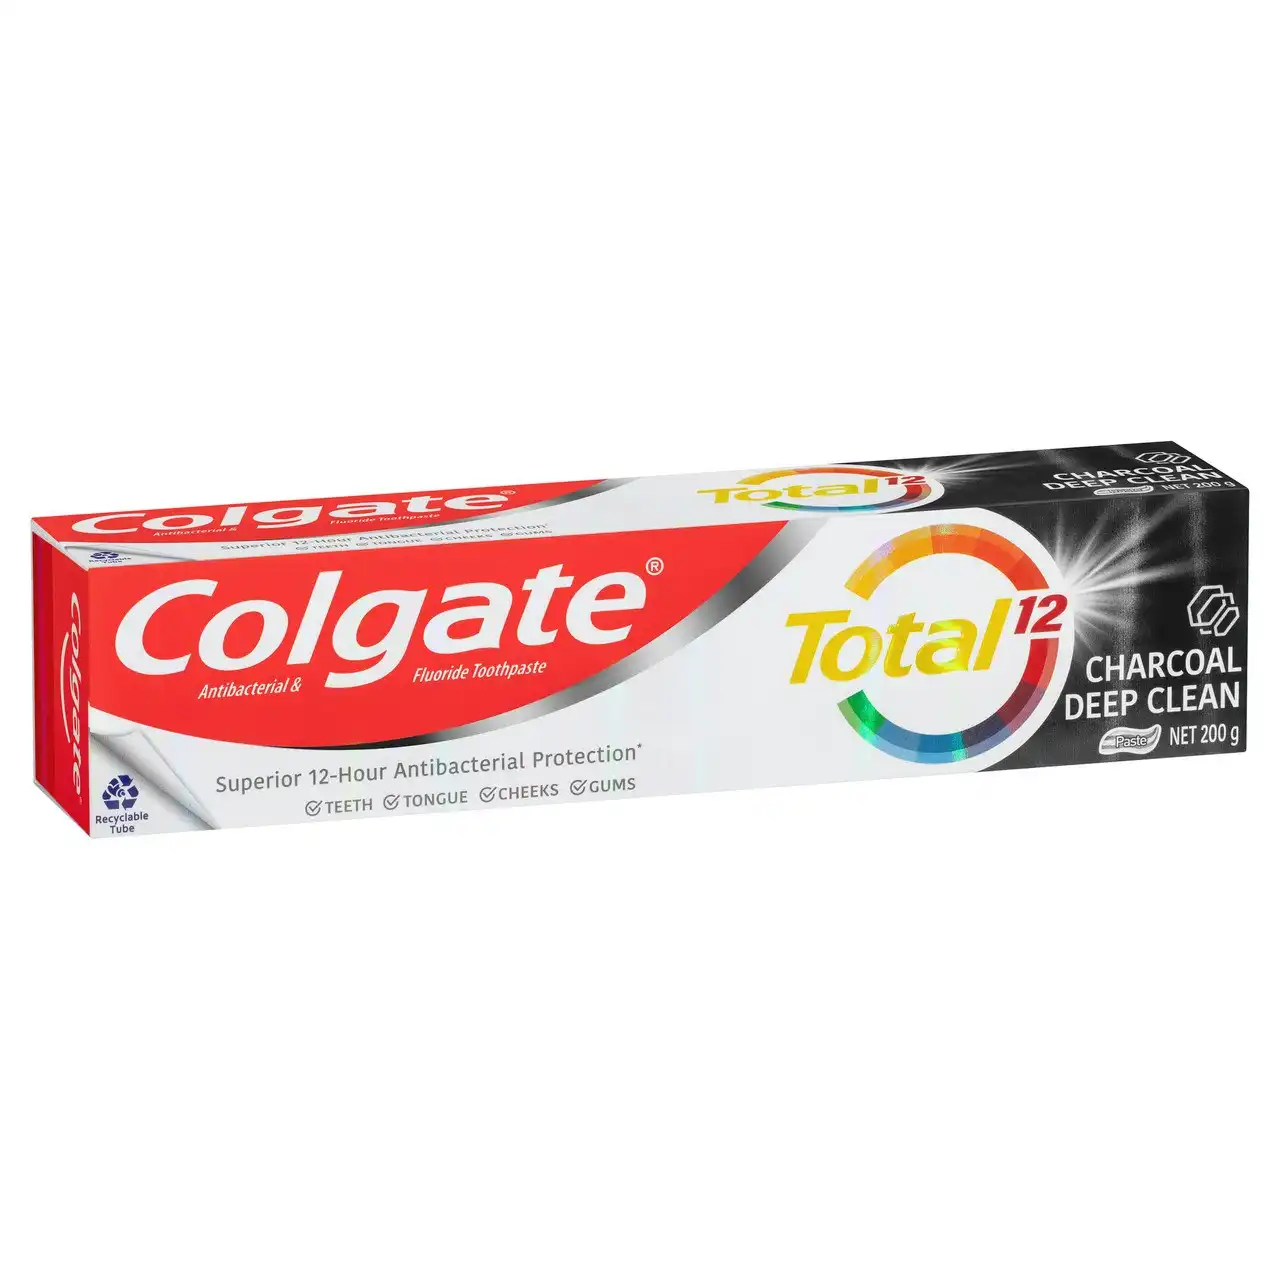 Colgate Total Charcoal Deep Clean Antibacterial Toothpaste, 200g, Whole Mouth Health, Multi Benefit